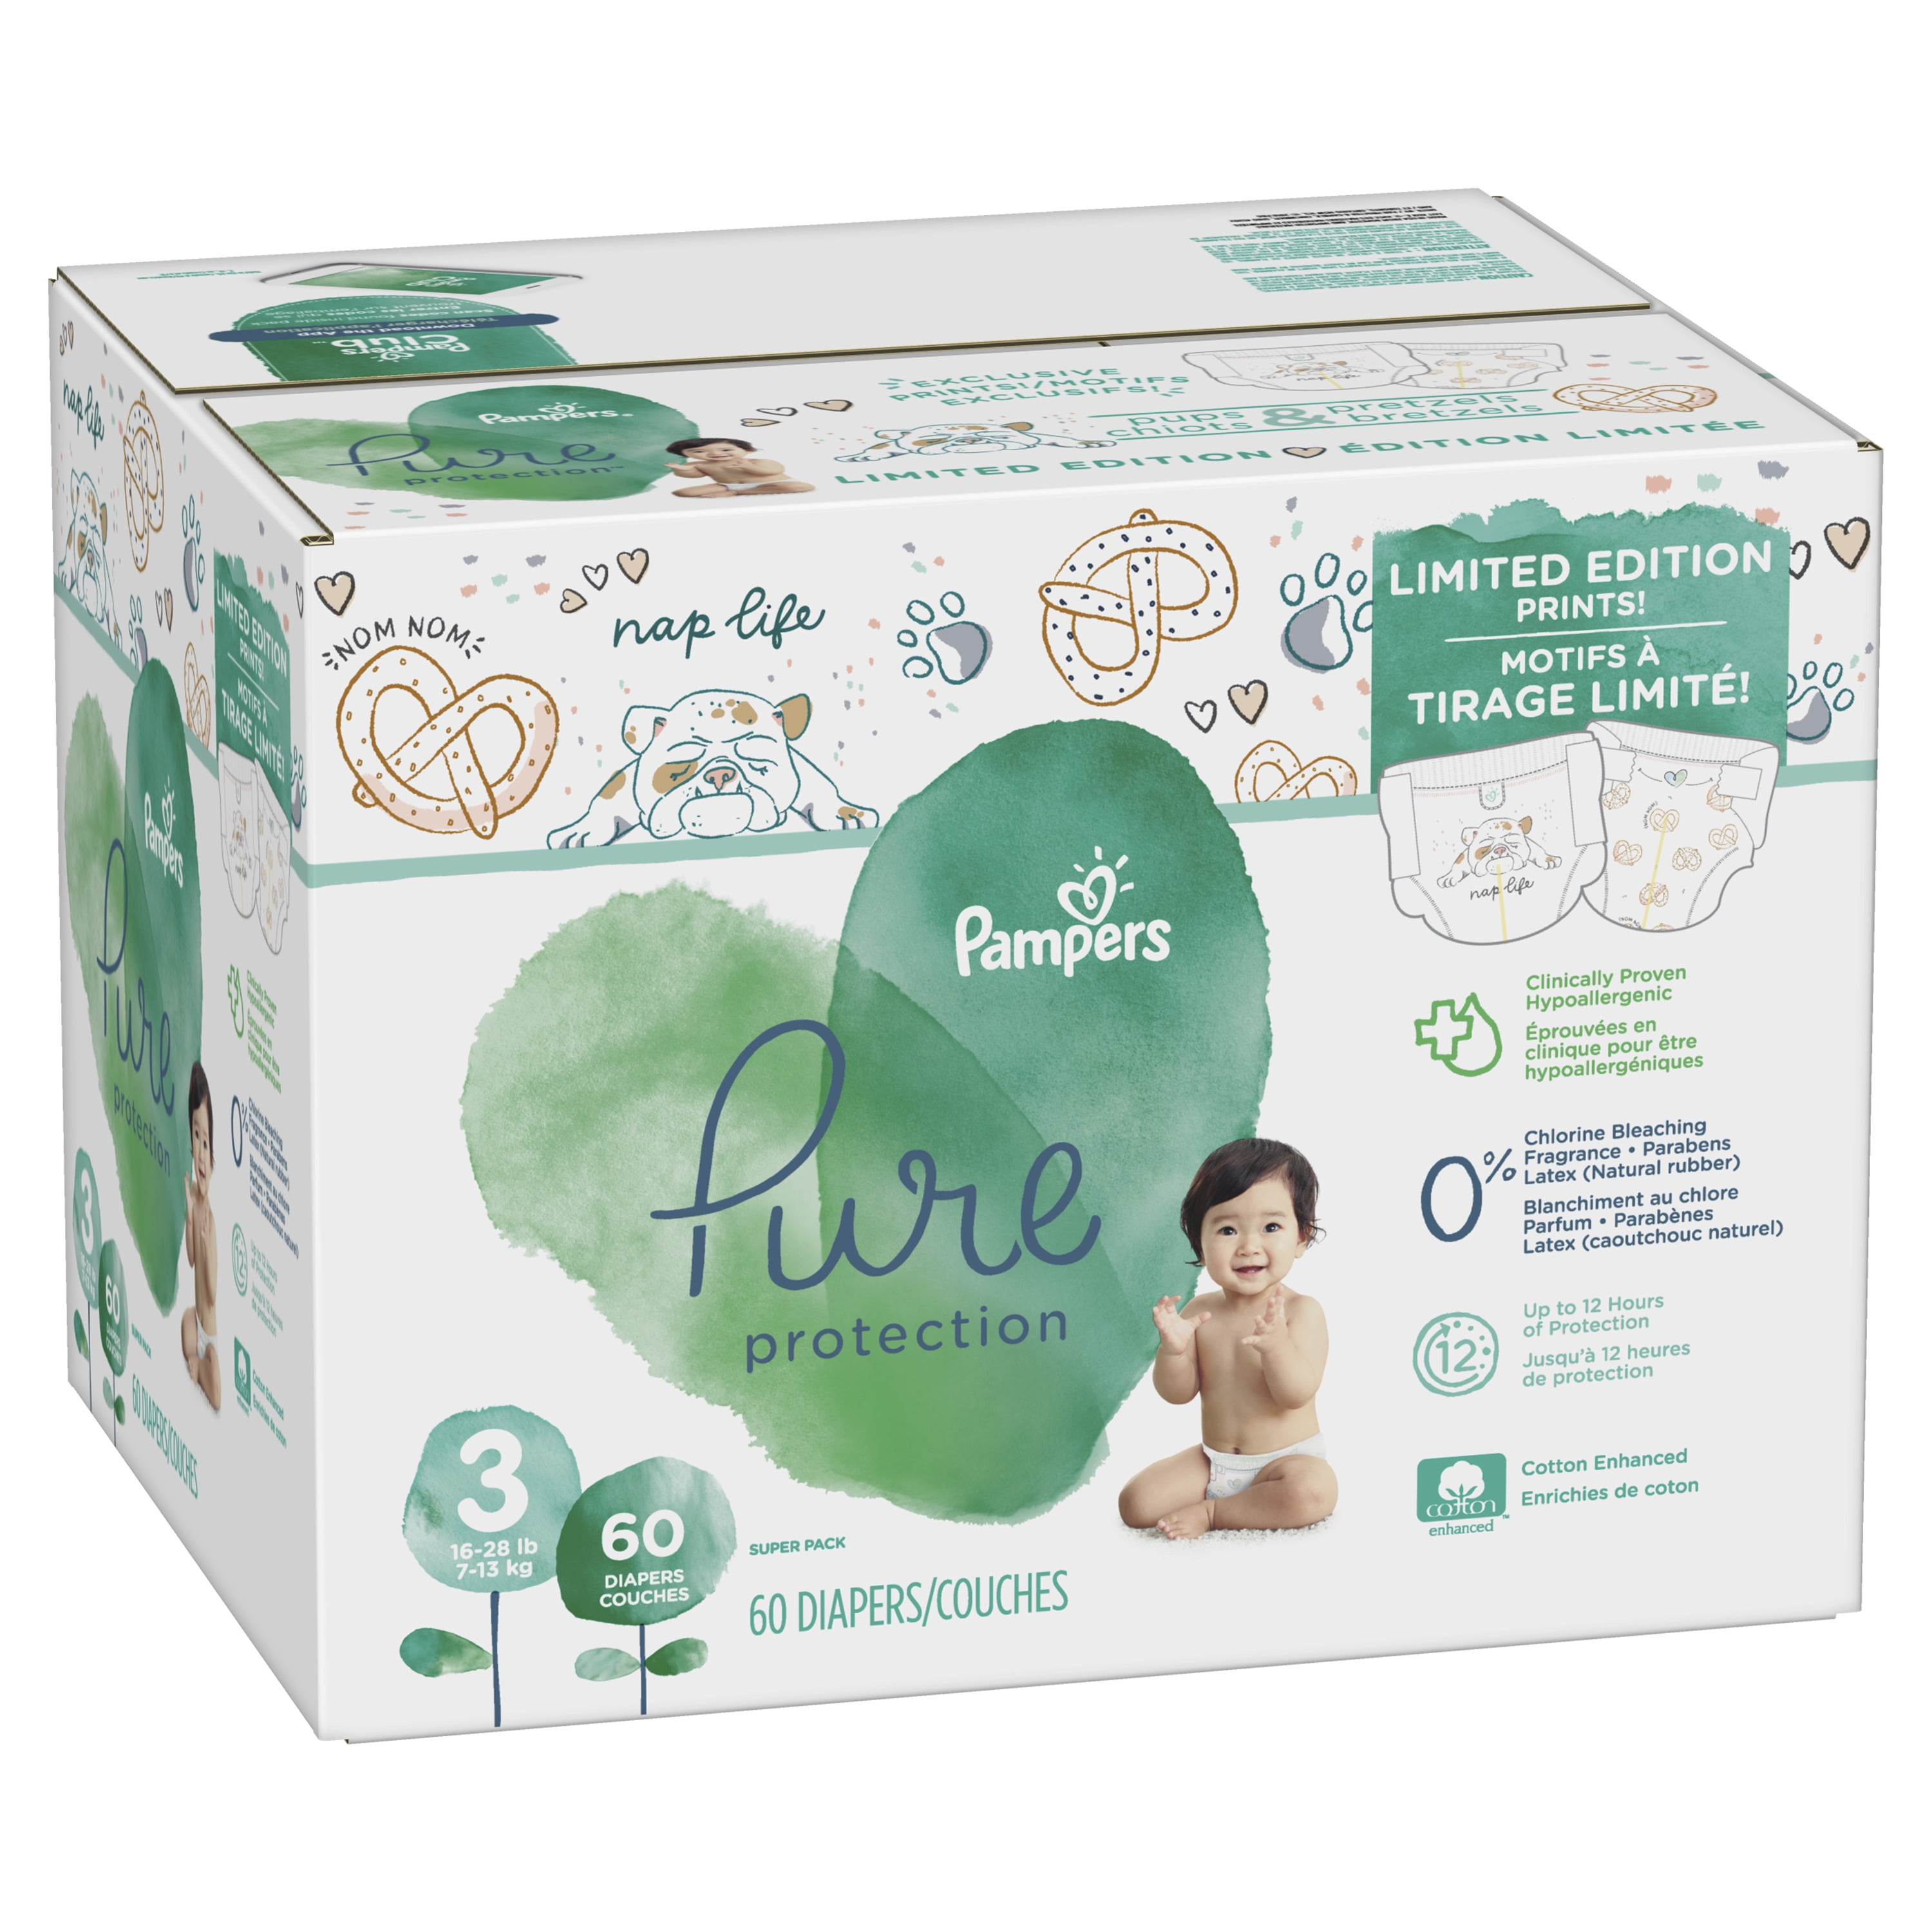 100 Moti Kg Six Video - Pampers Pure Protection Limited Edition Natural Diapers, Size 3, 60 Ct -  Walmart.com